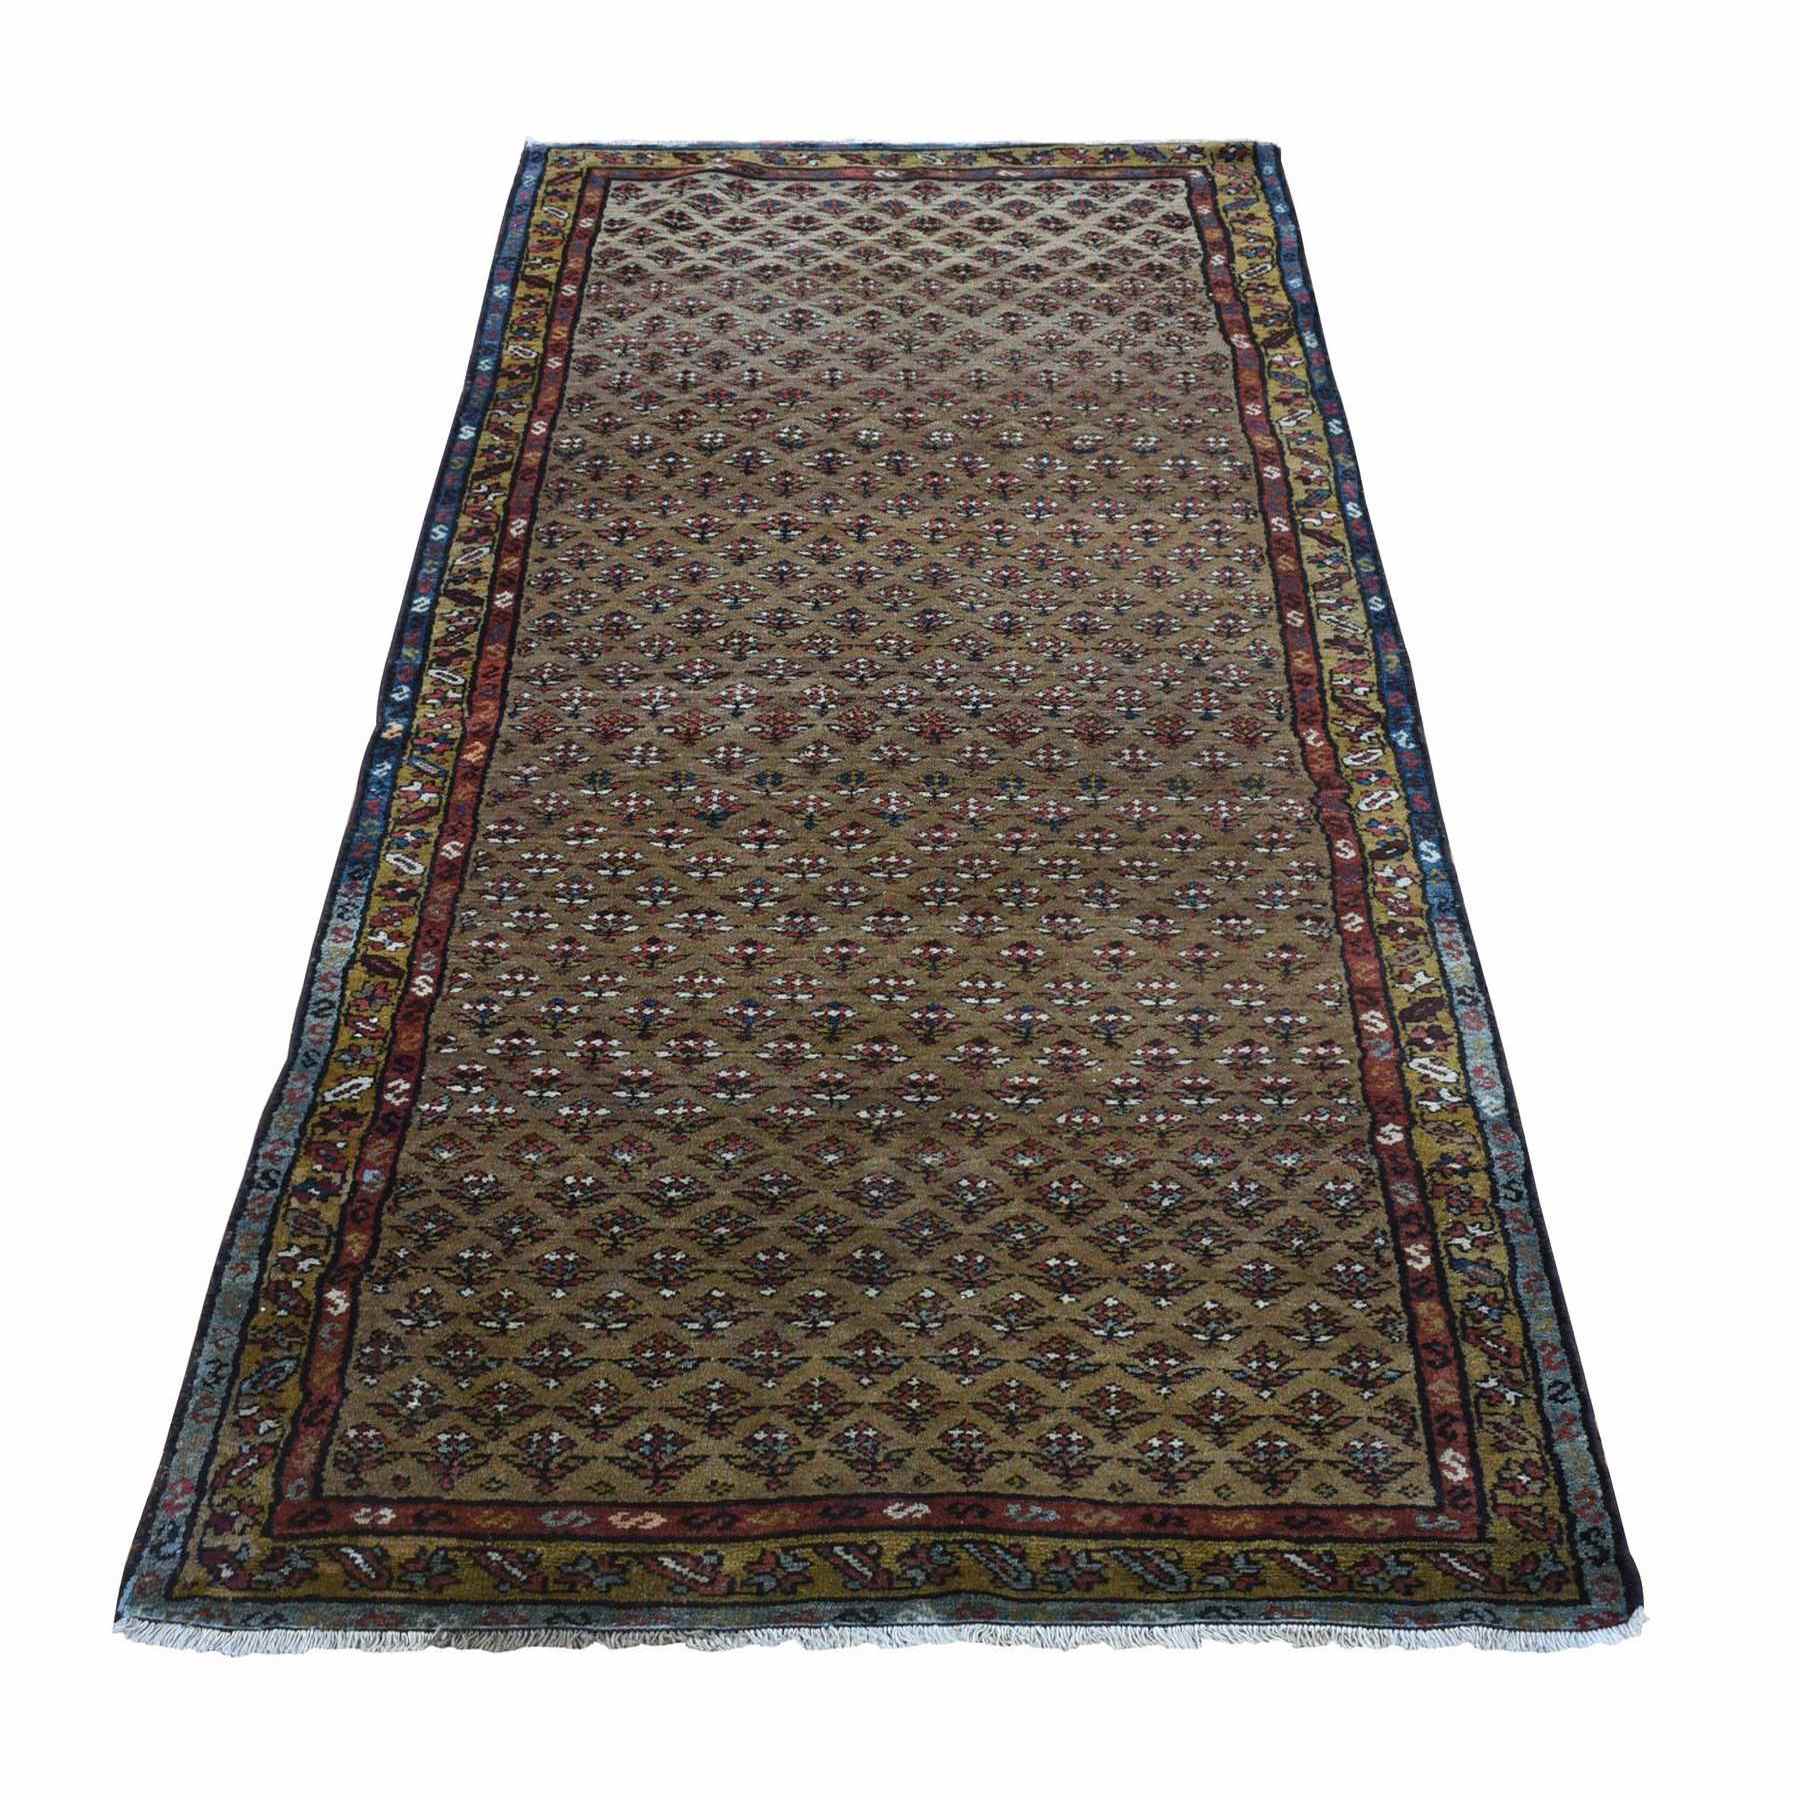 Antique-Hand-Knotted-Rug-400370